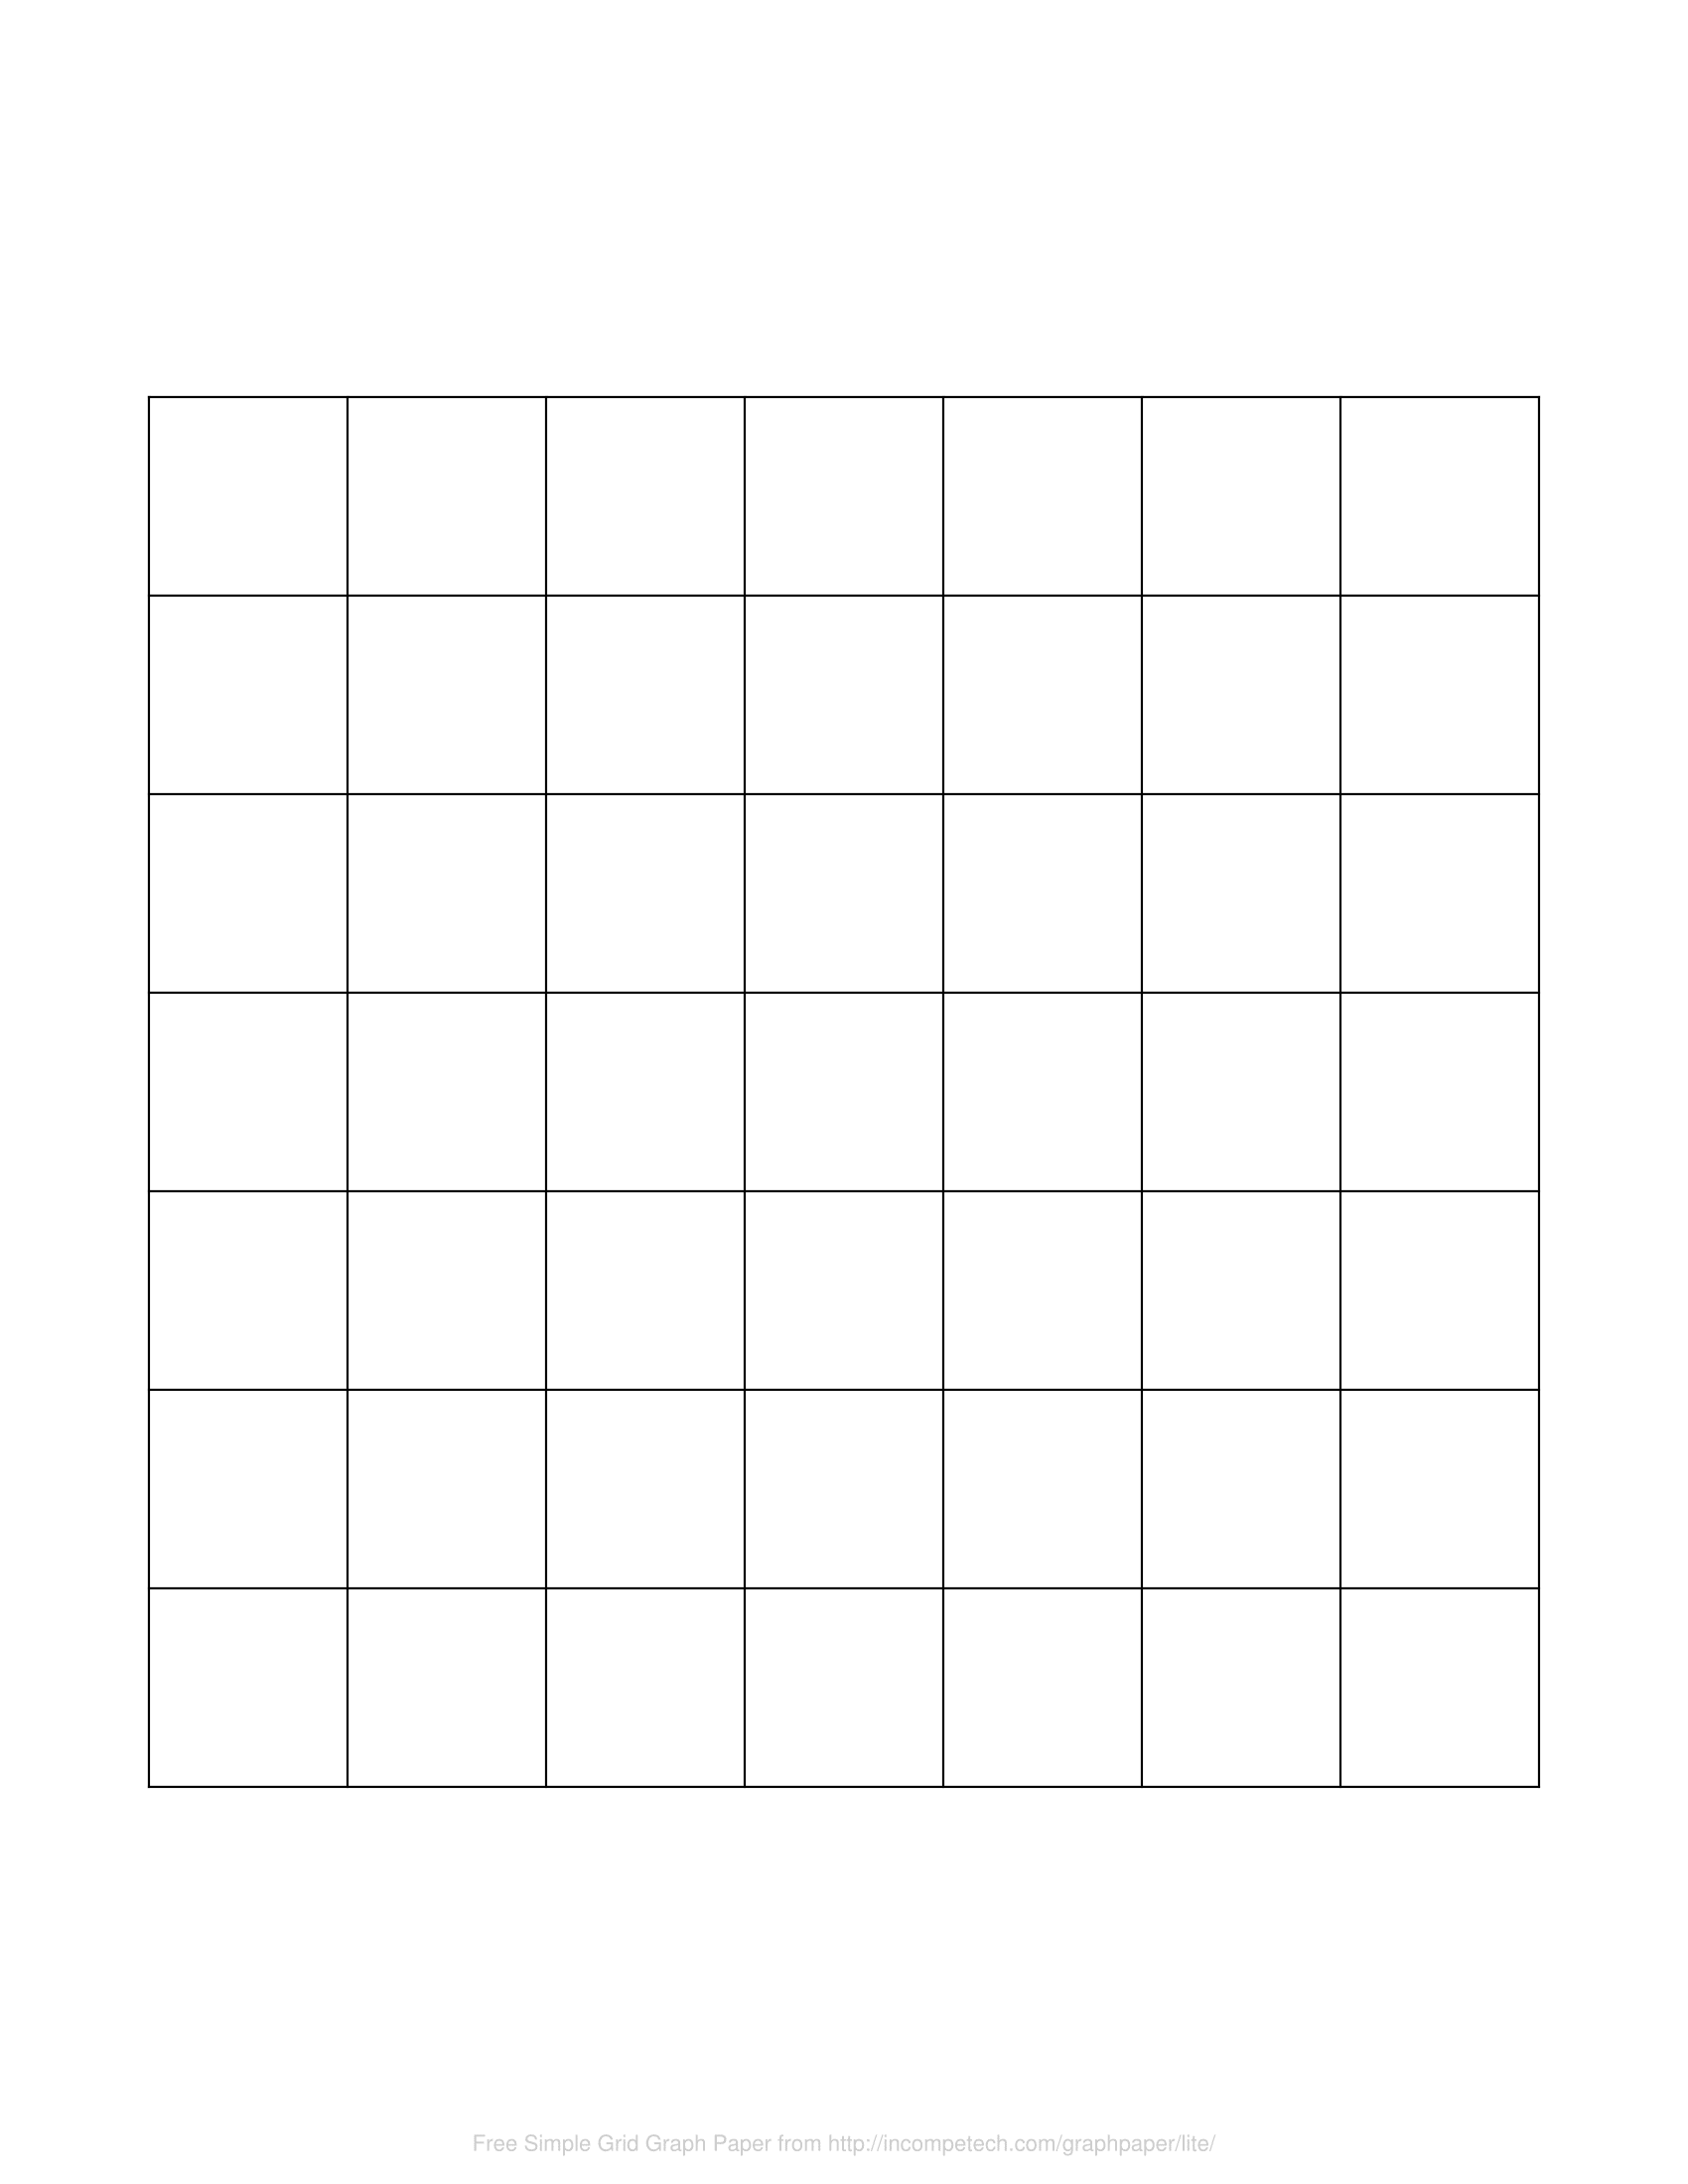 Free Online Graph Paper / Simple Grid Intended For Blank Picture Graph Template